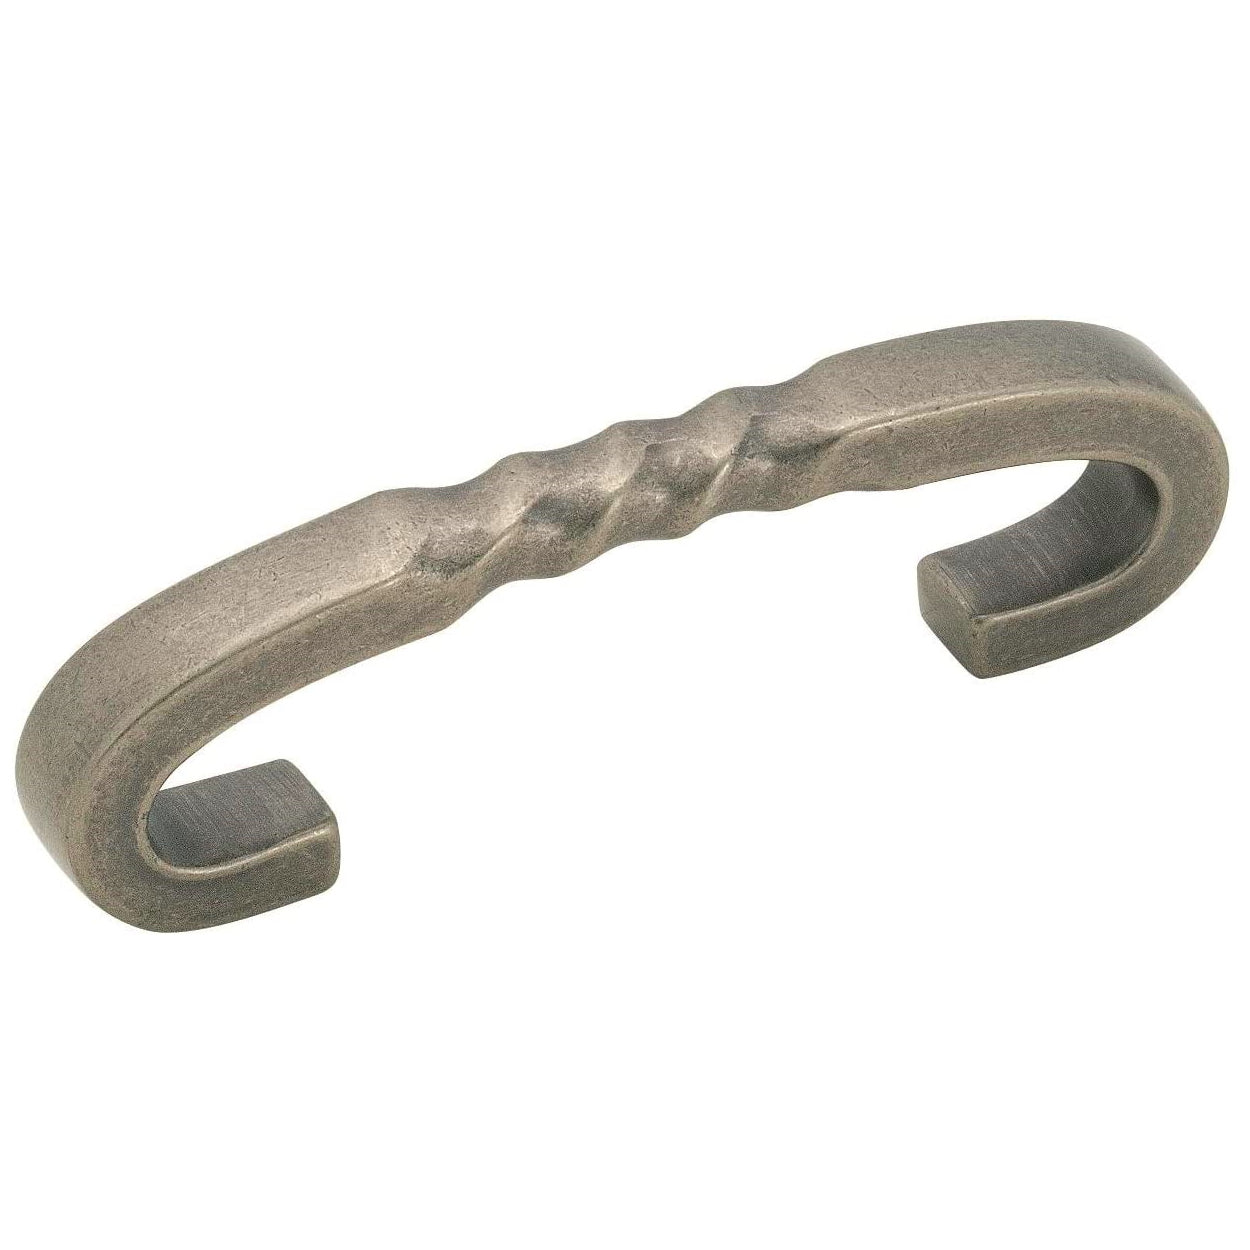 Amerock Inspirations Weathered Nickel 3 inch CTC Cabinet Handle Pull BP1584WN